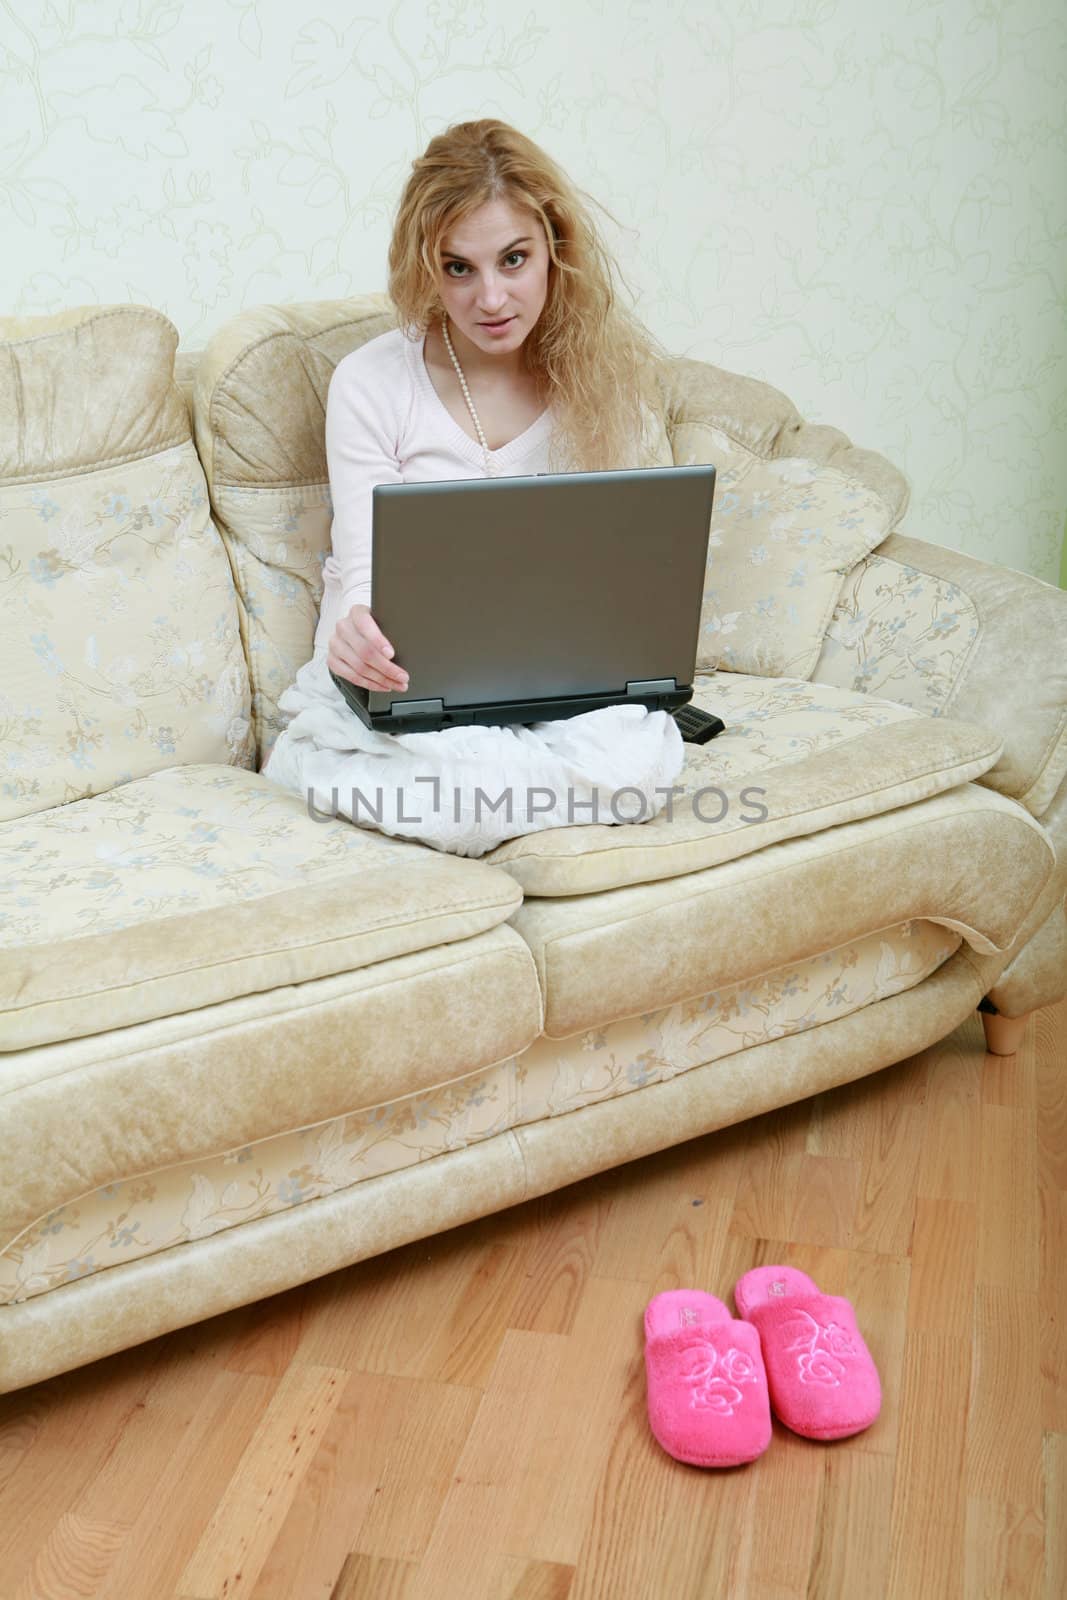 An image of a nice girl with laptop